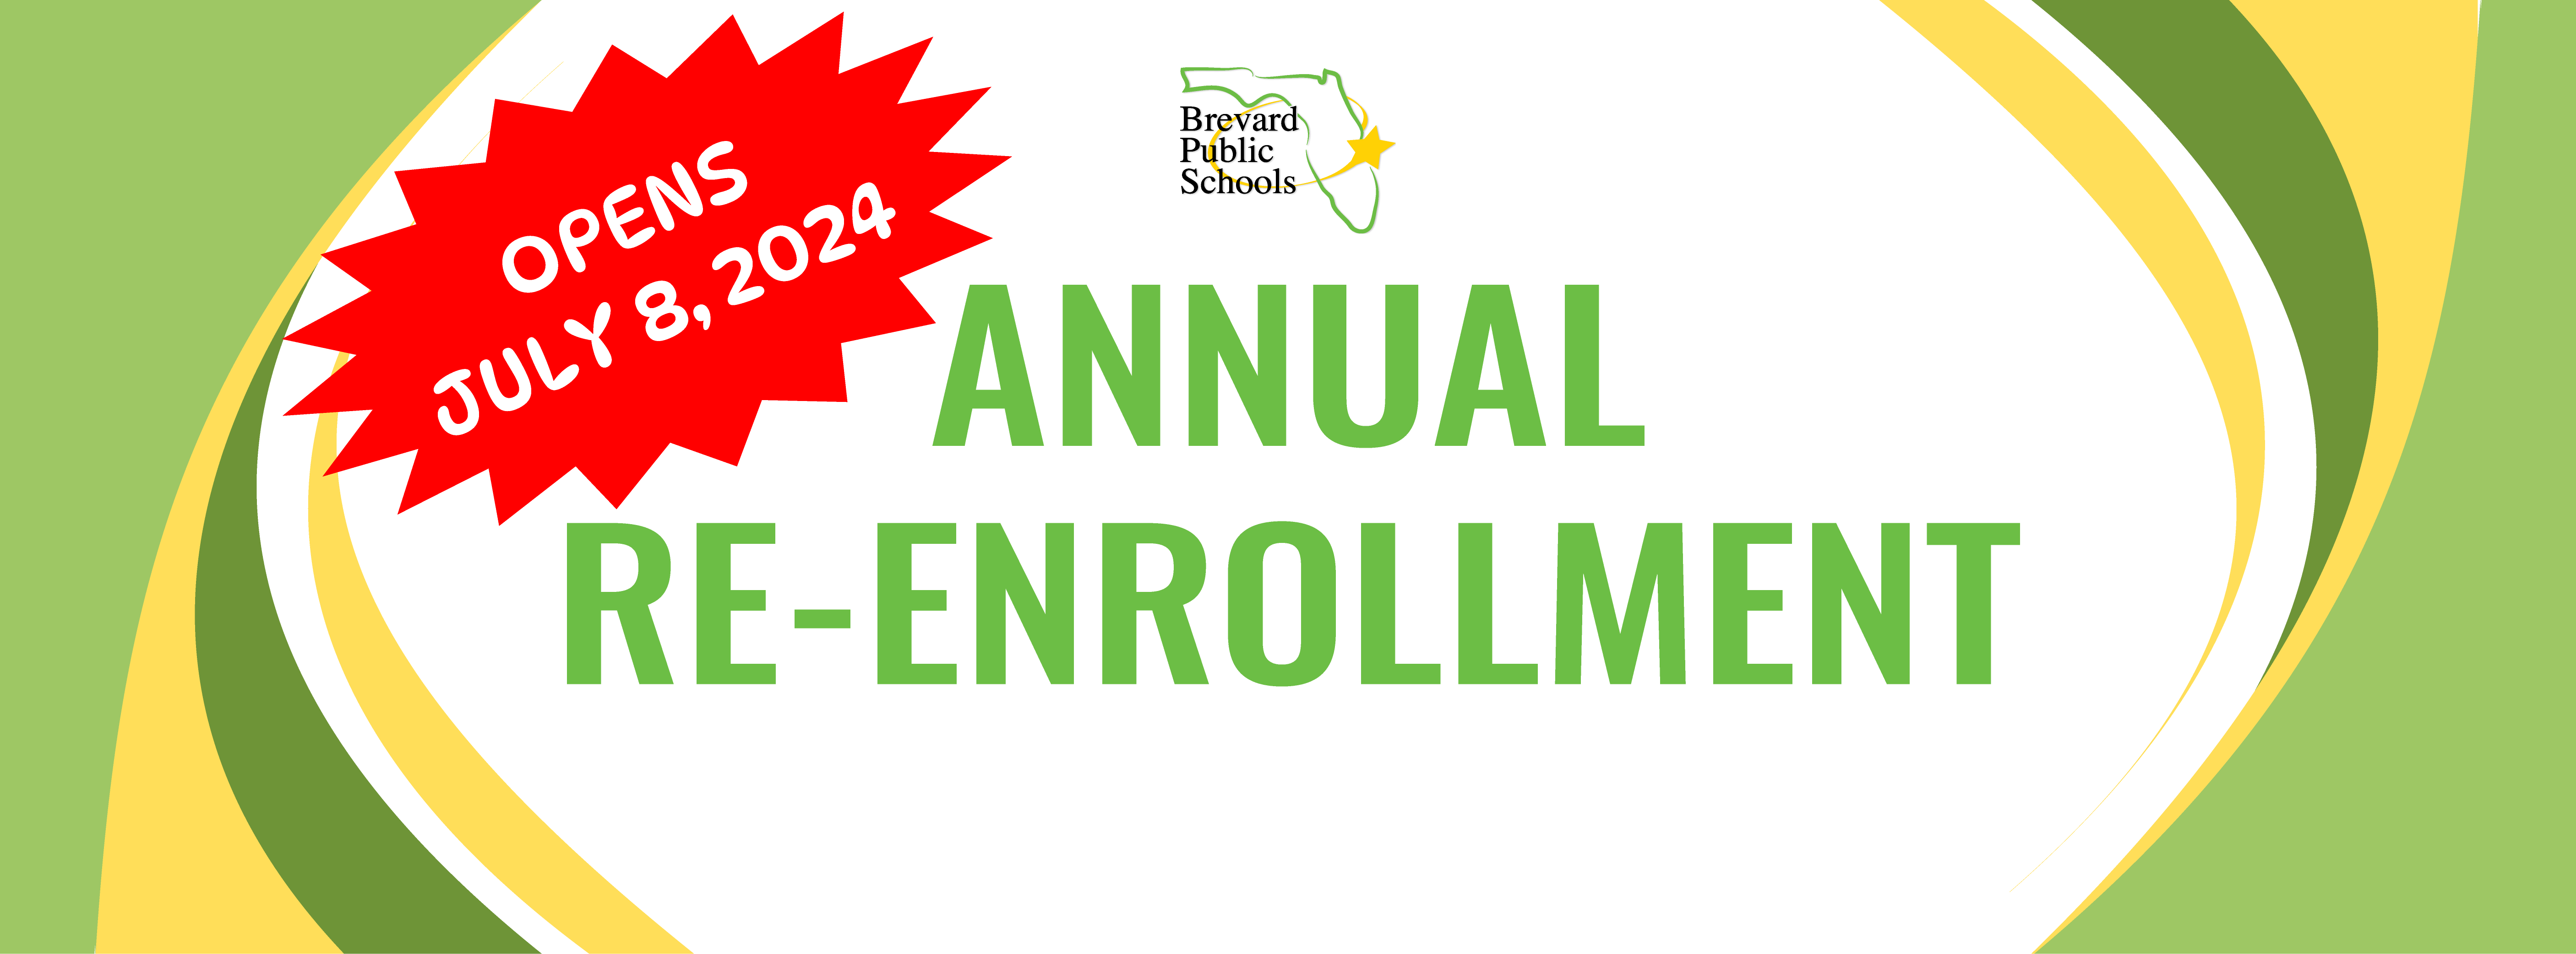 Annual Re-Enrollment - Opens July 8, 2024 